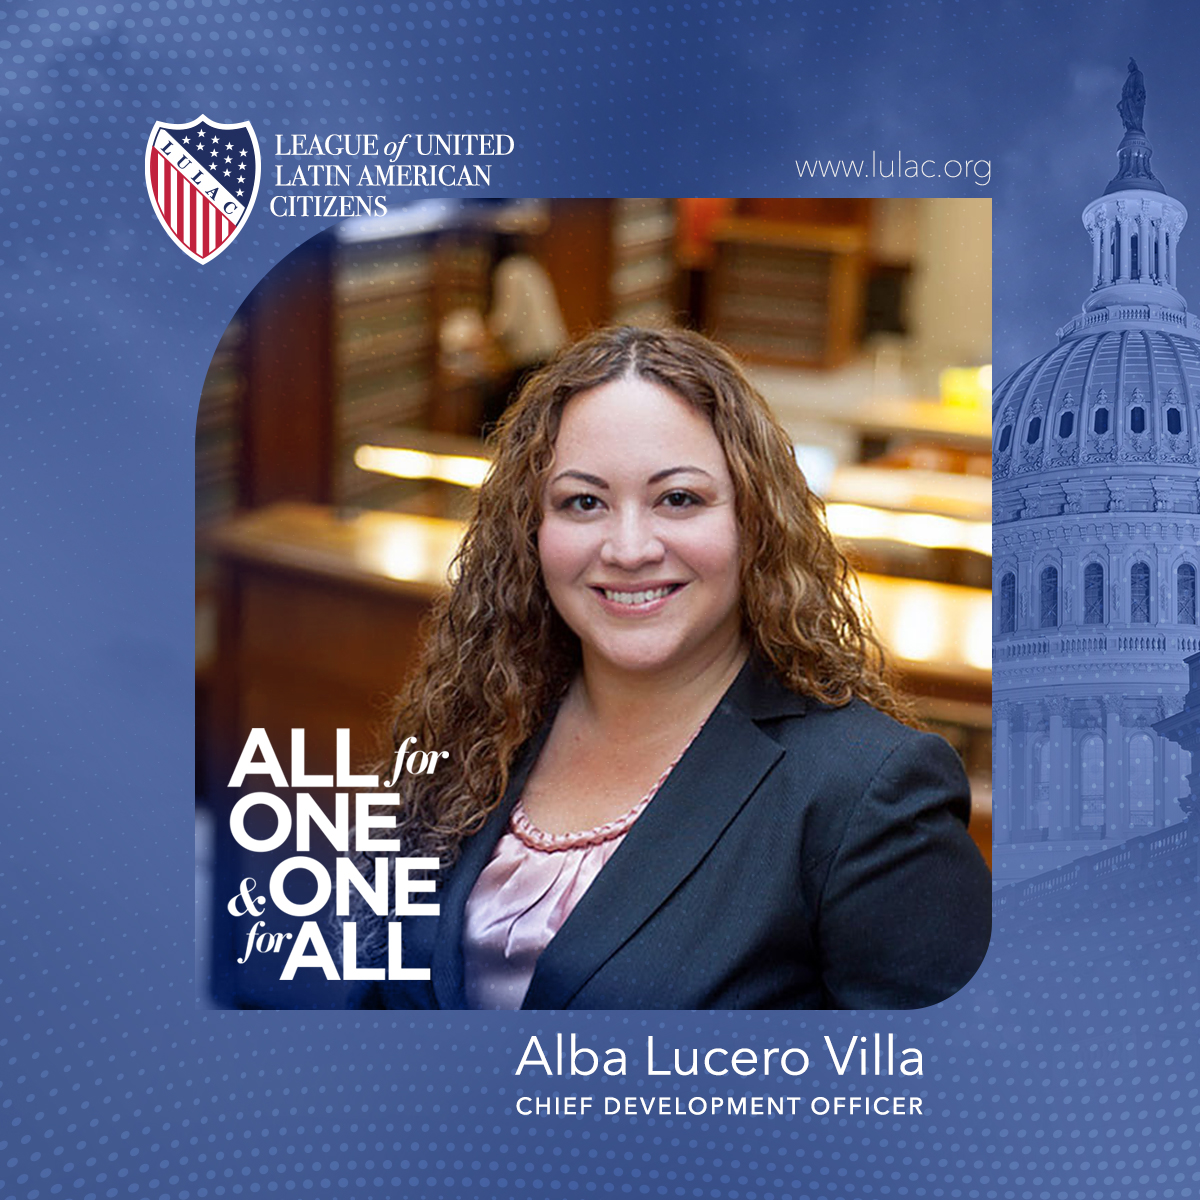 LULAC welcomes Alba Lucero Villa as Chief Development Officer on its National Staff. Alba Lucero Villa joins LULAC as Chief Development Officer, bringing with her more than 20 years of experience advocating for human and civil rights in the U.S. and internationally. #LULAC